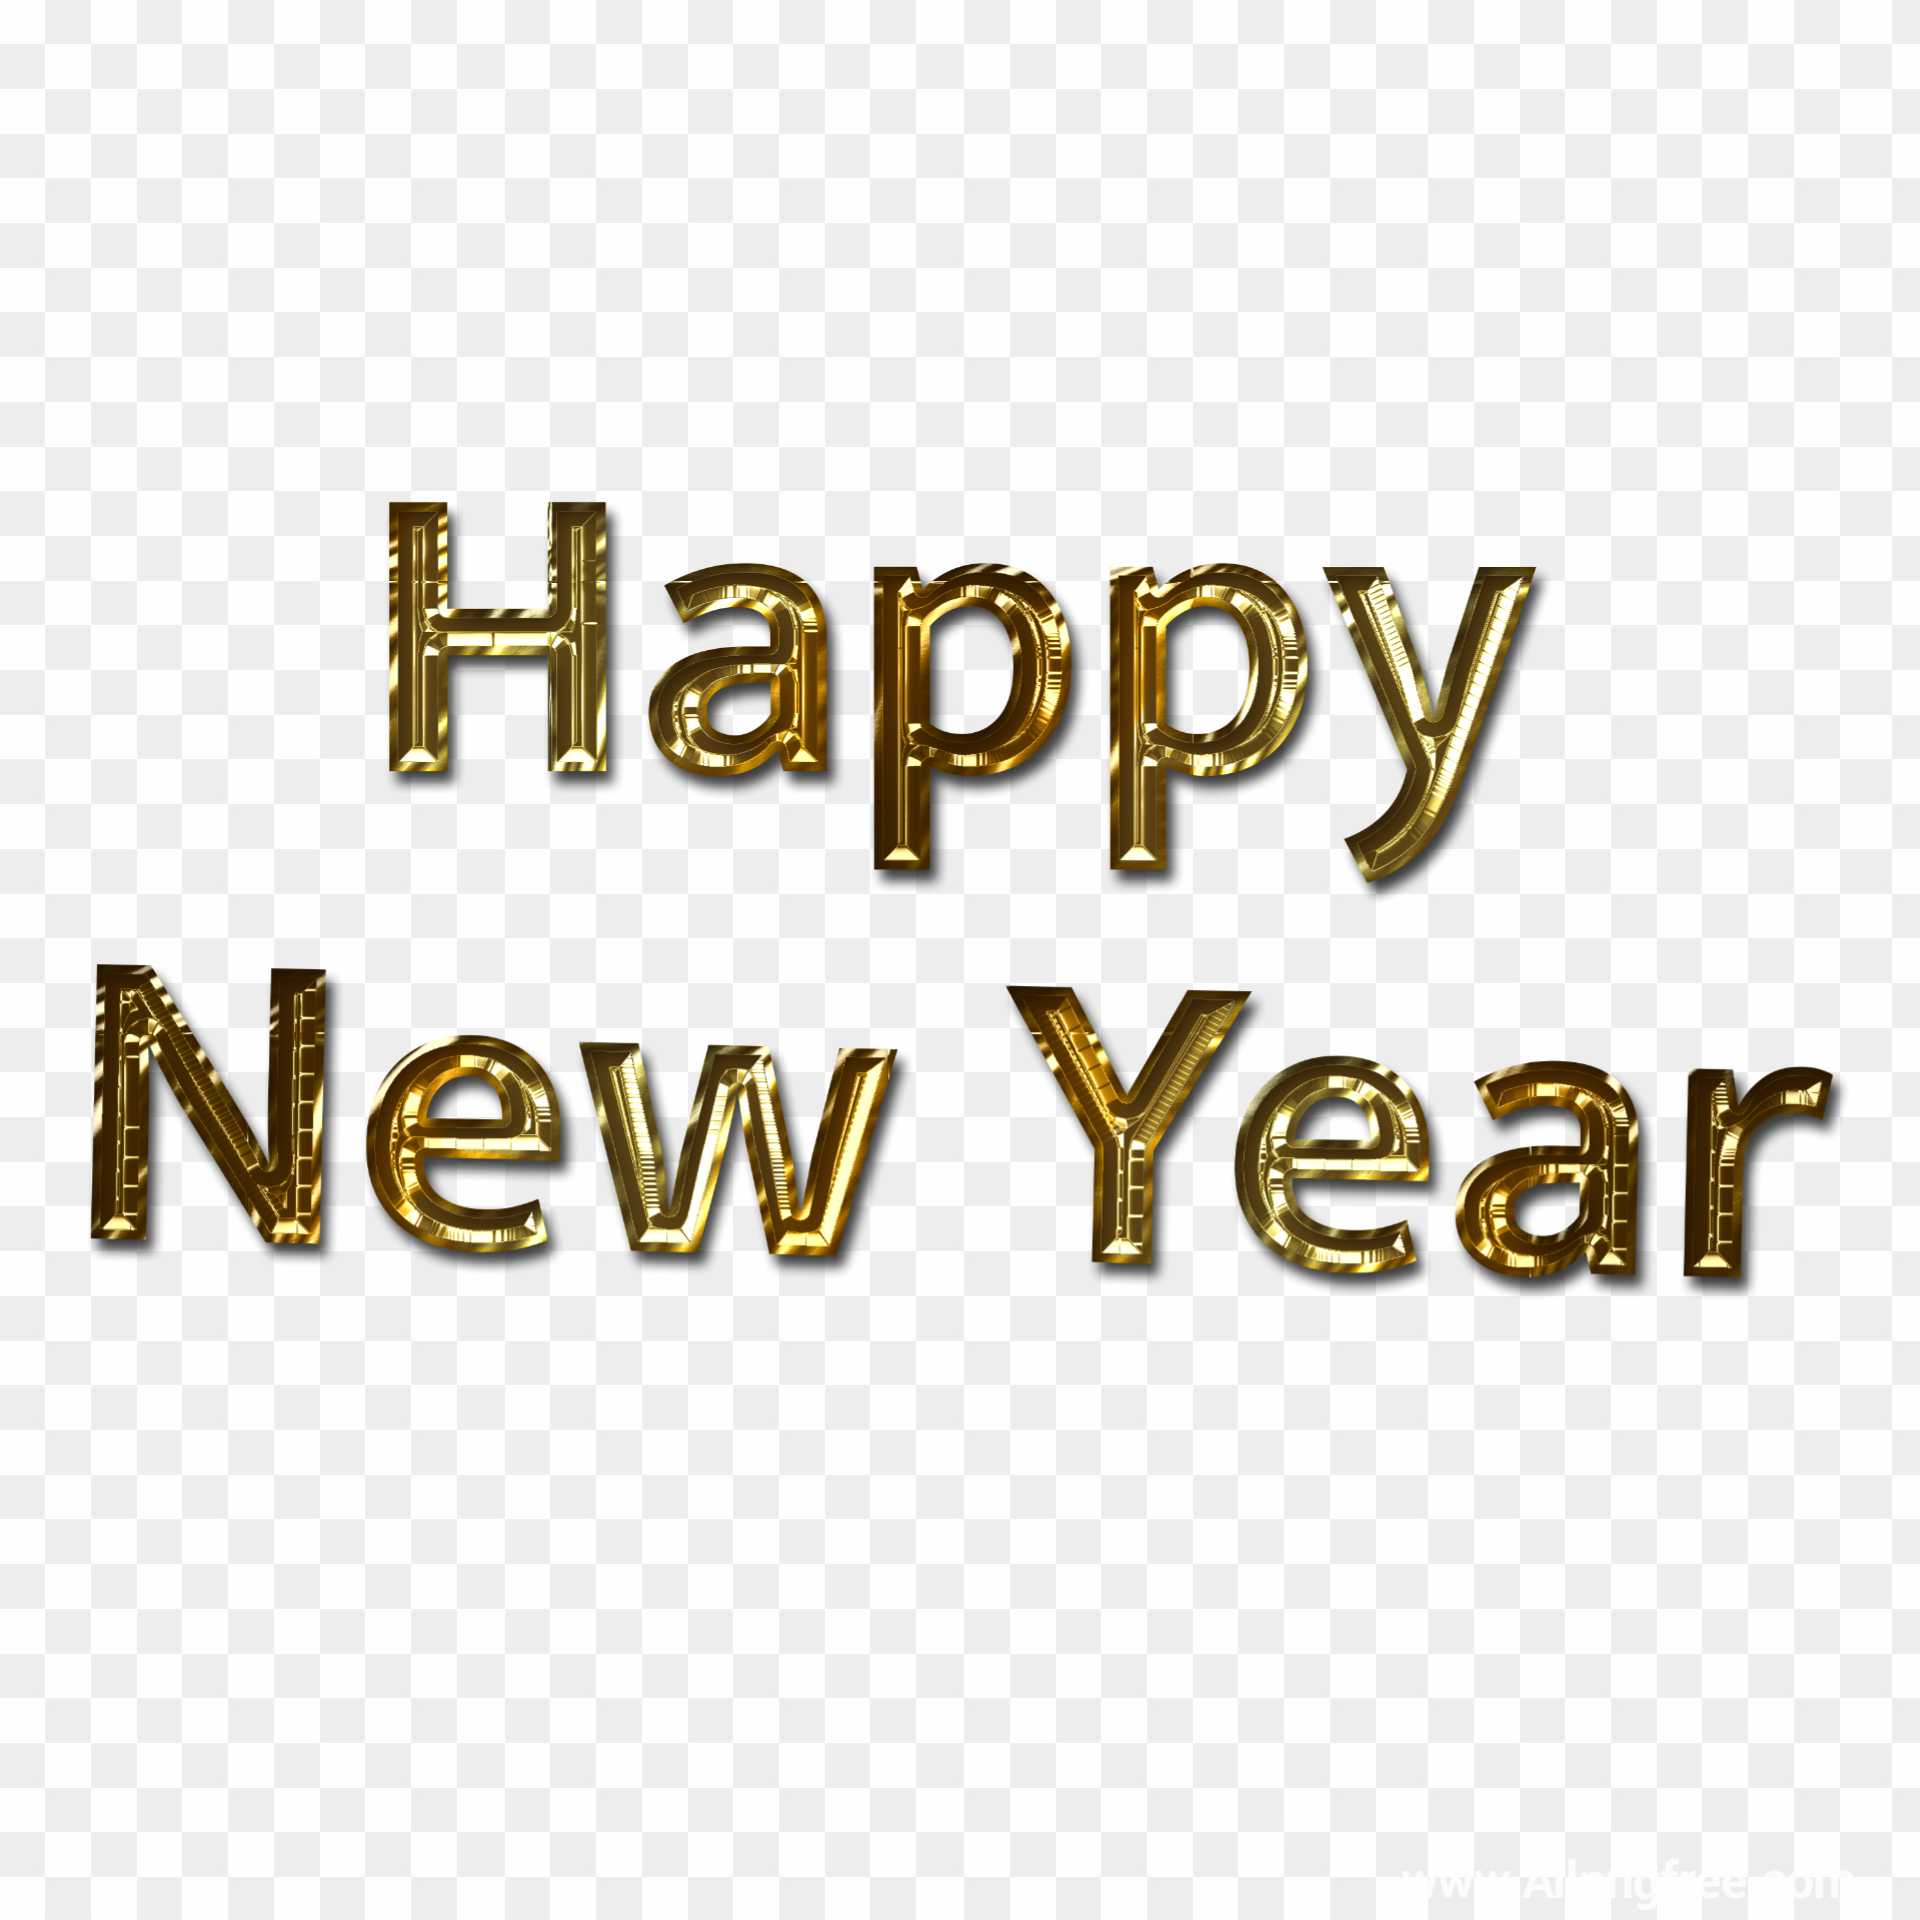 Happy New year golden text PNG images